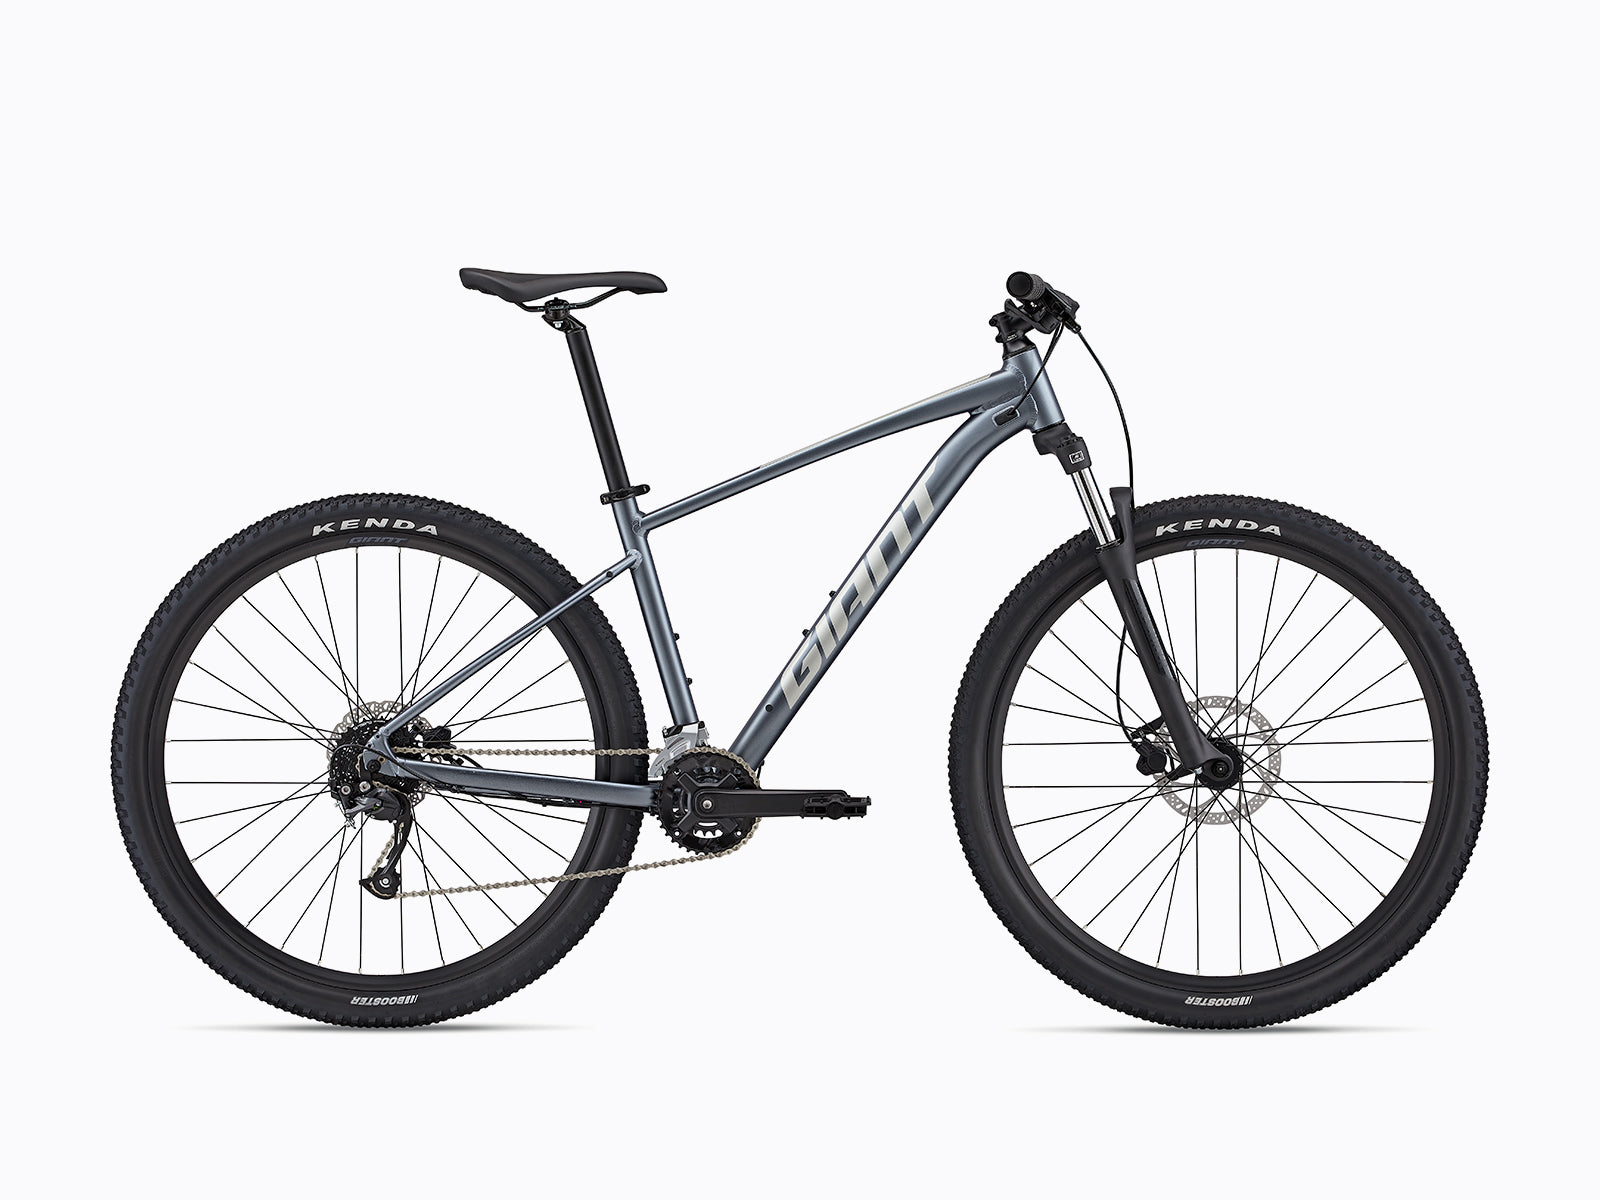 image features a giant talon, a versatile mountain bike that can be used as a city bike and a fitness bike